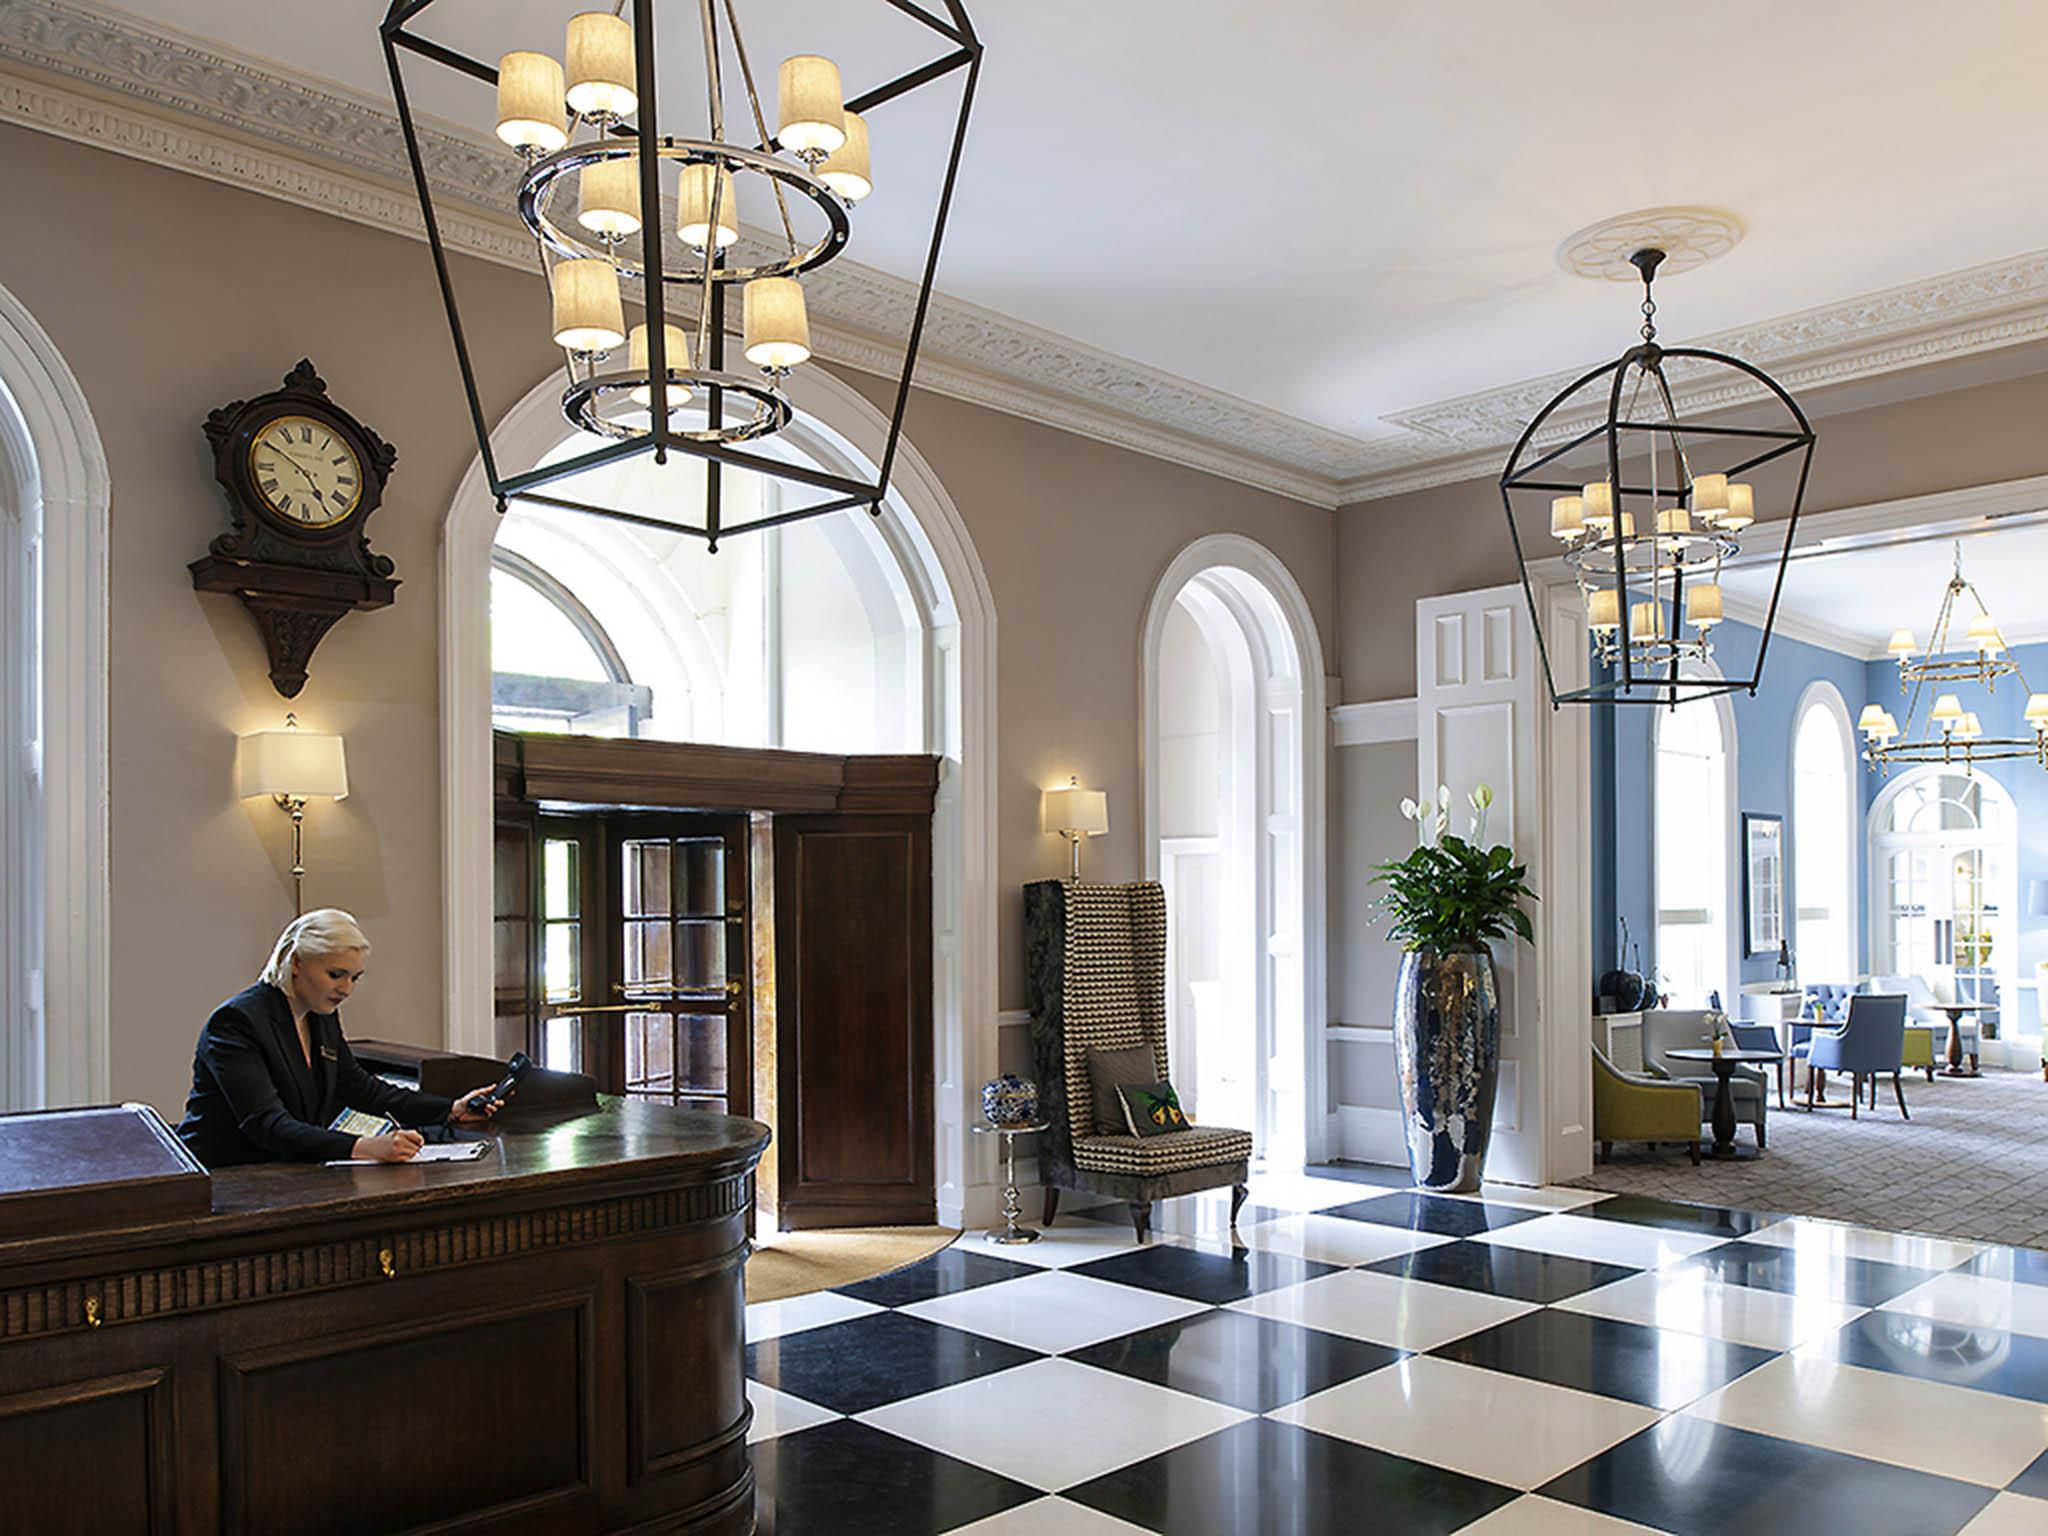 Opening in 1838, the Queen Victoria is a Grade II listed building and recently renovated